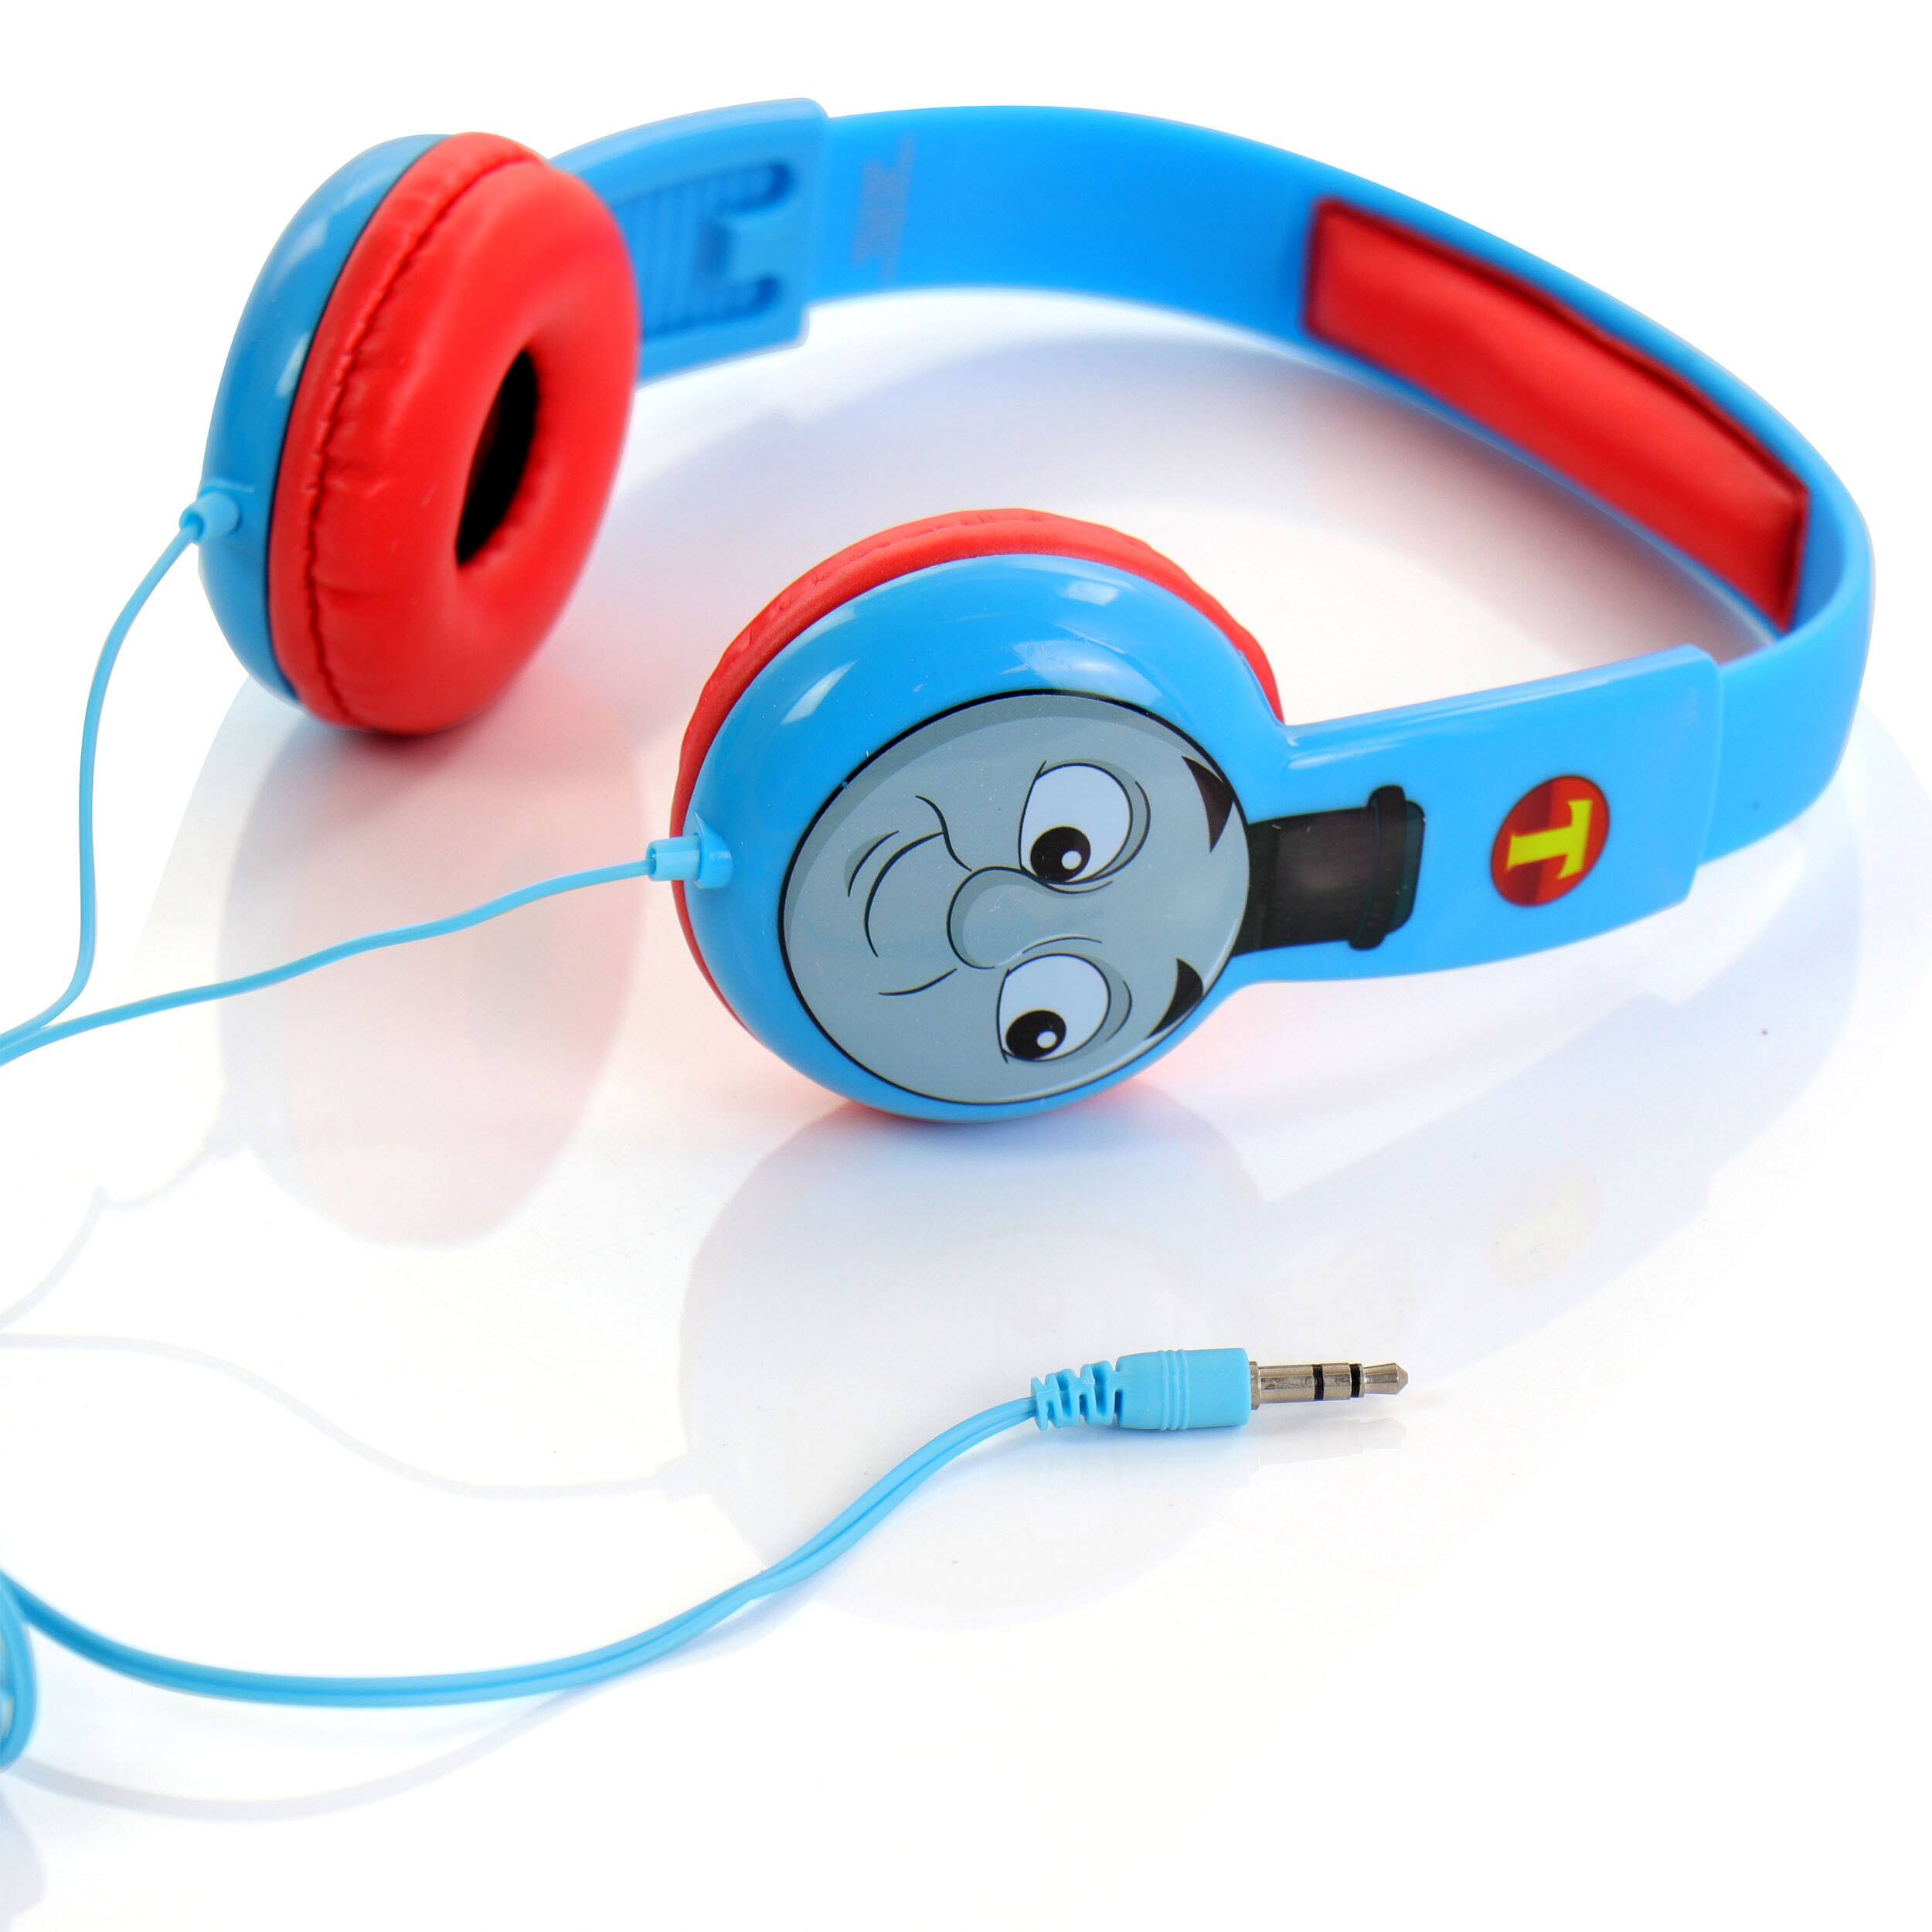 Thomas and Friends&#x2122; Kid-Safe Blue &#x26; Red Headphones